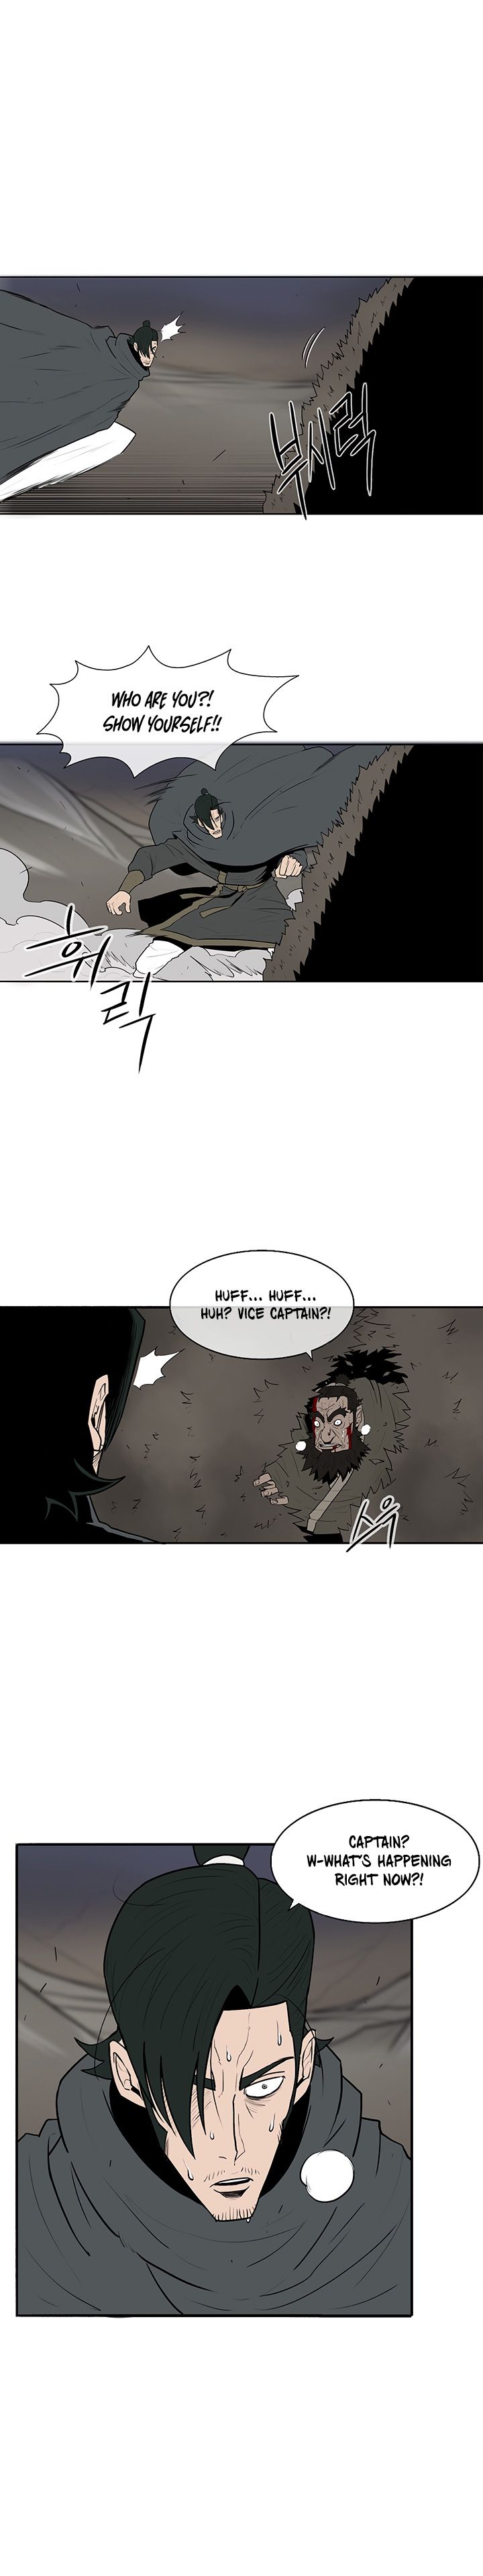 Legend of the Northern Blade chapter 12 page 11